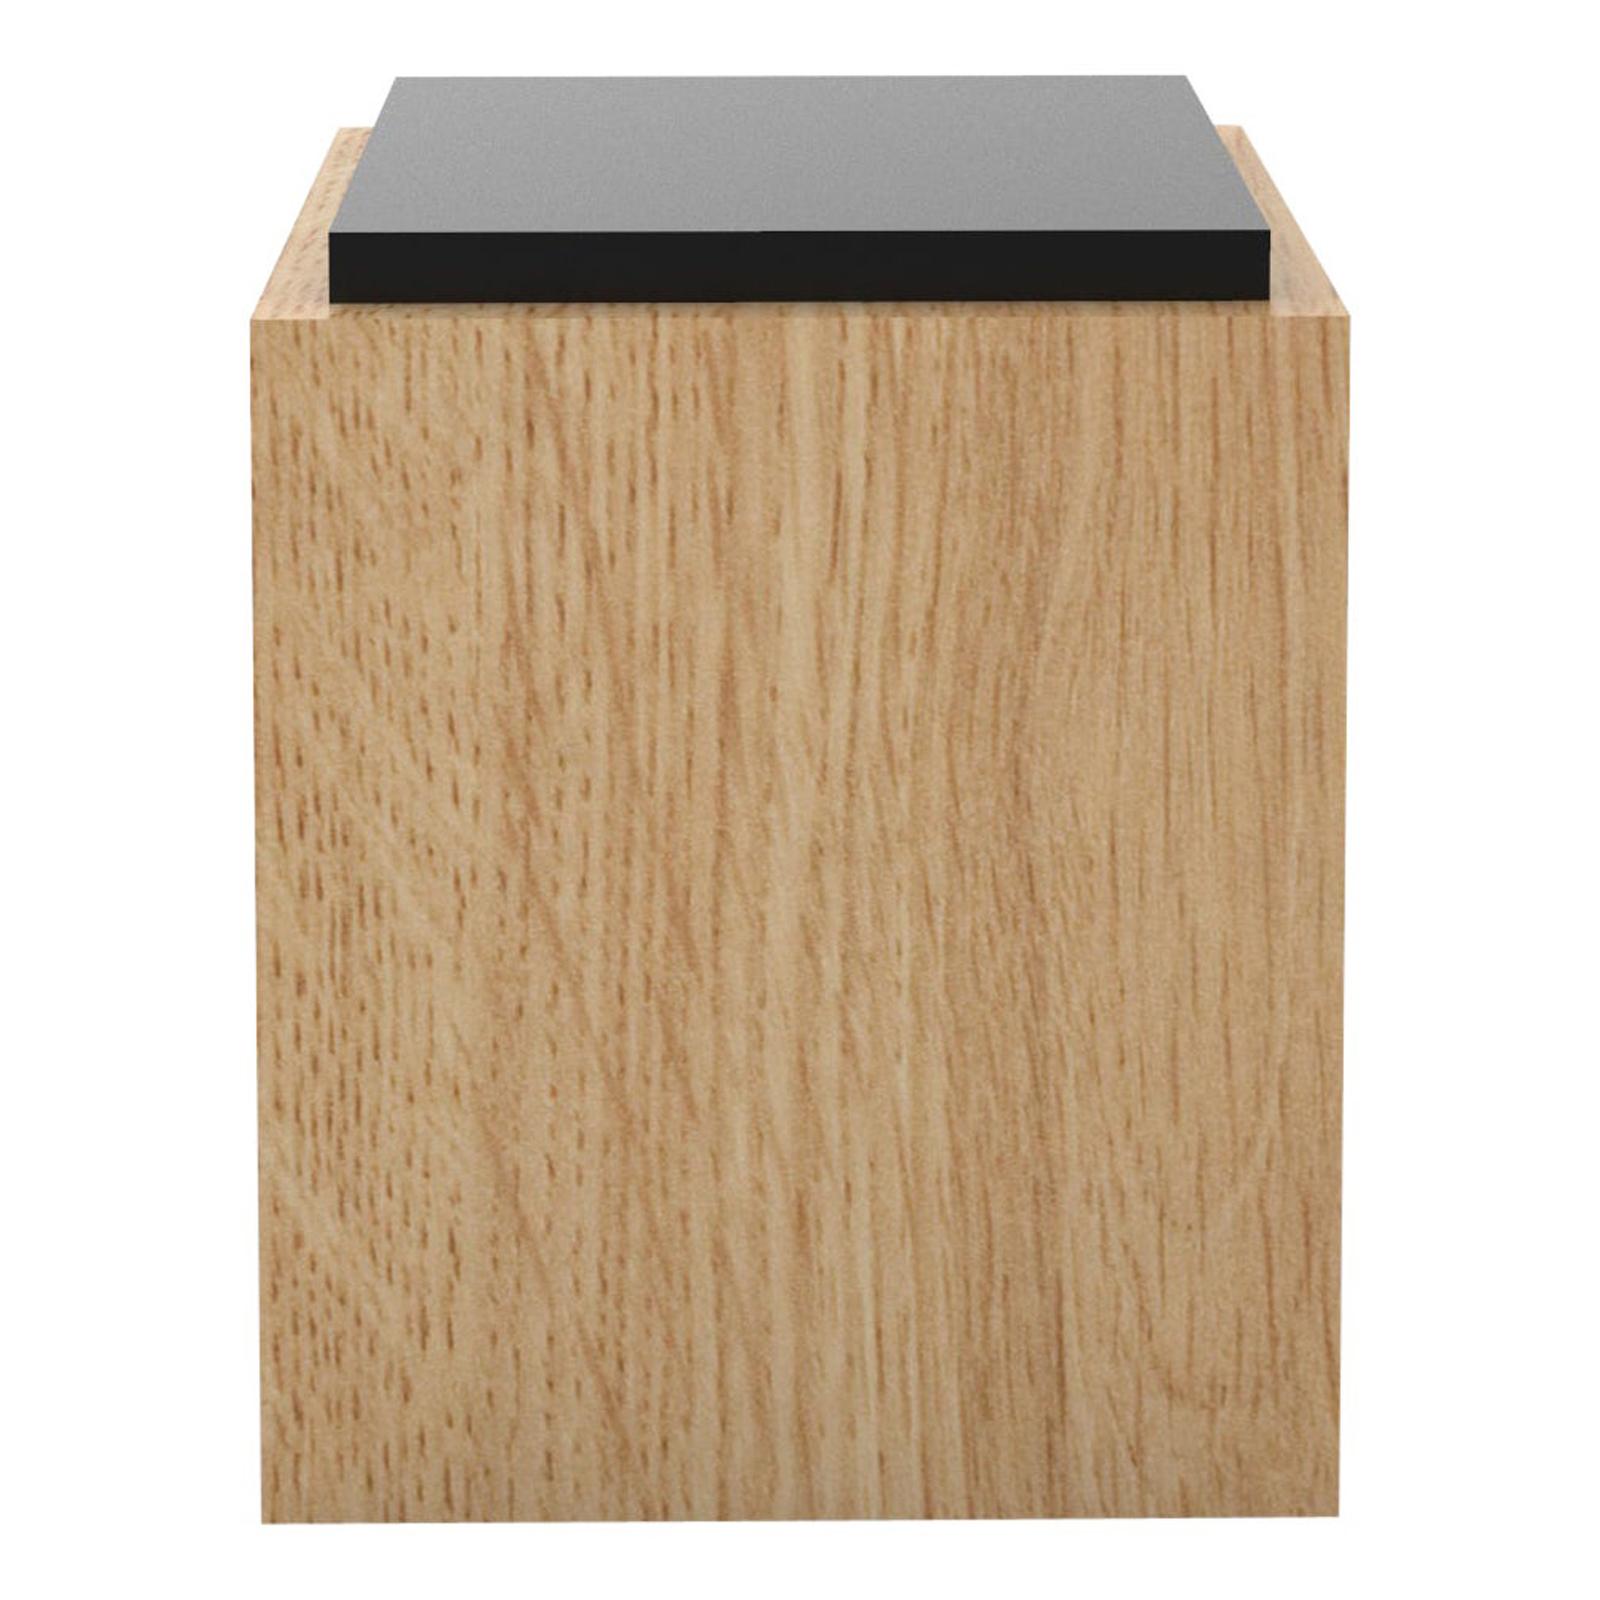 Contemporary 103 Side Table in Oak and Black by Orphan Work